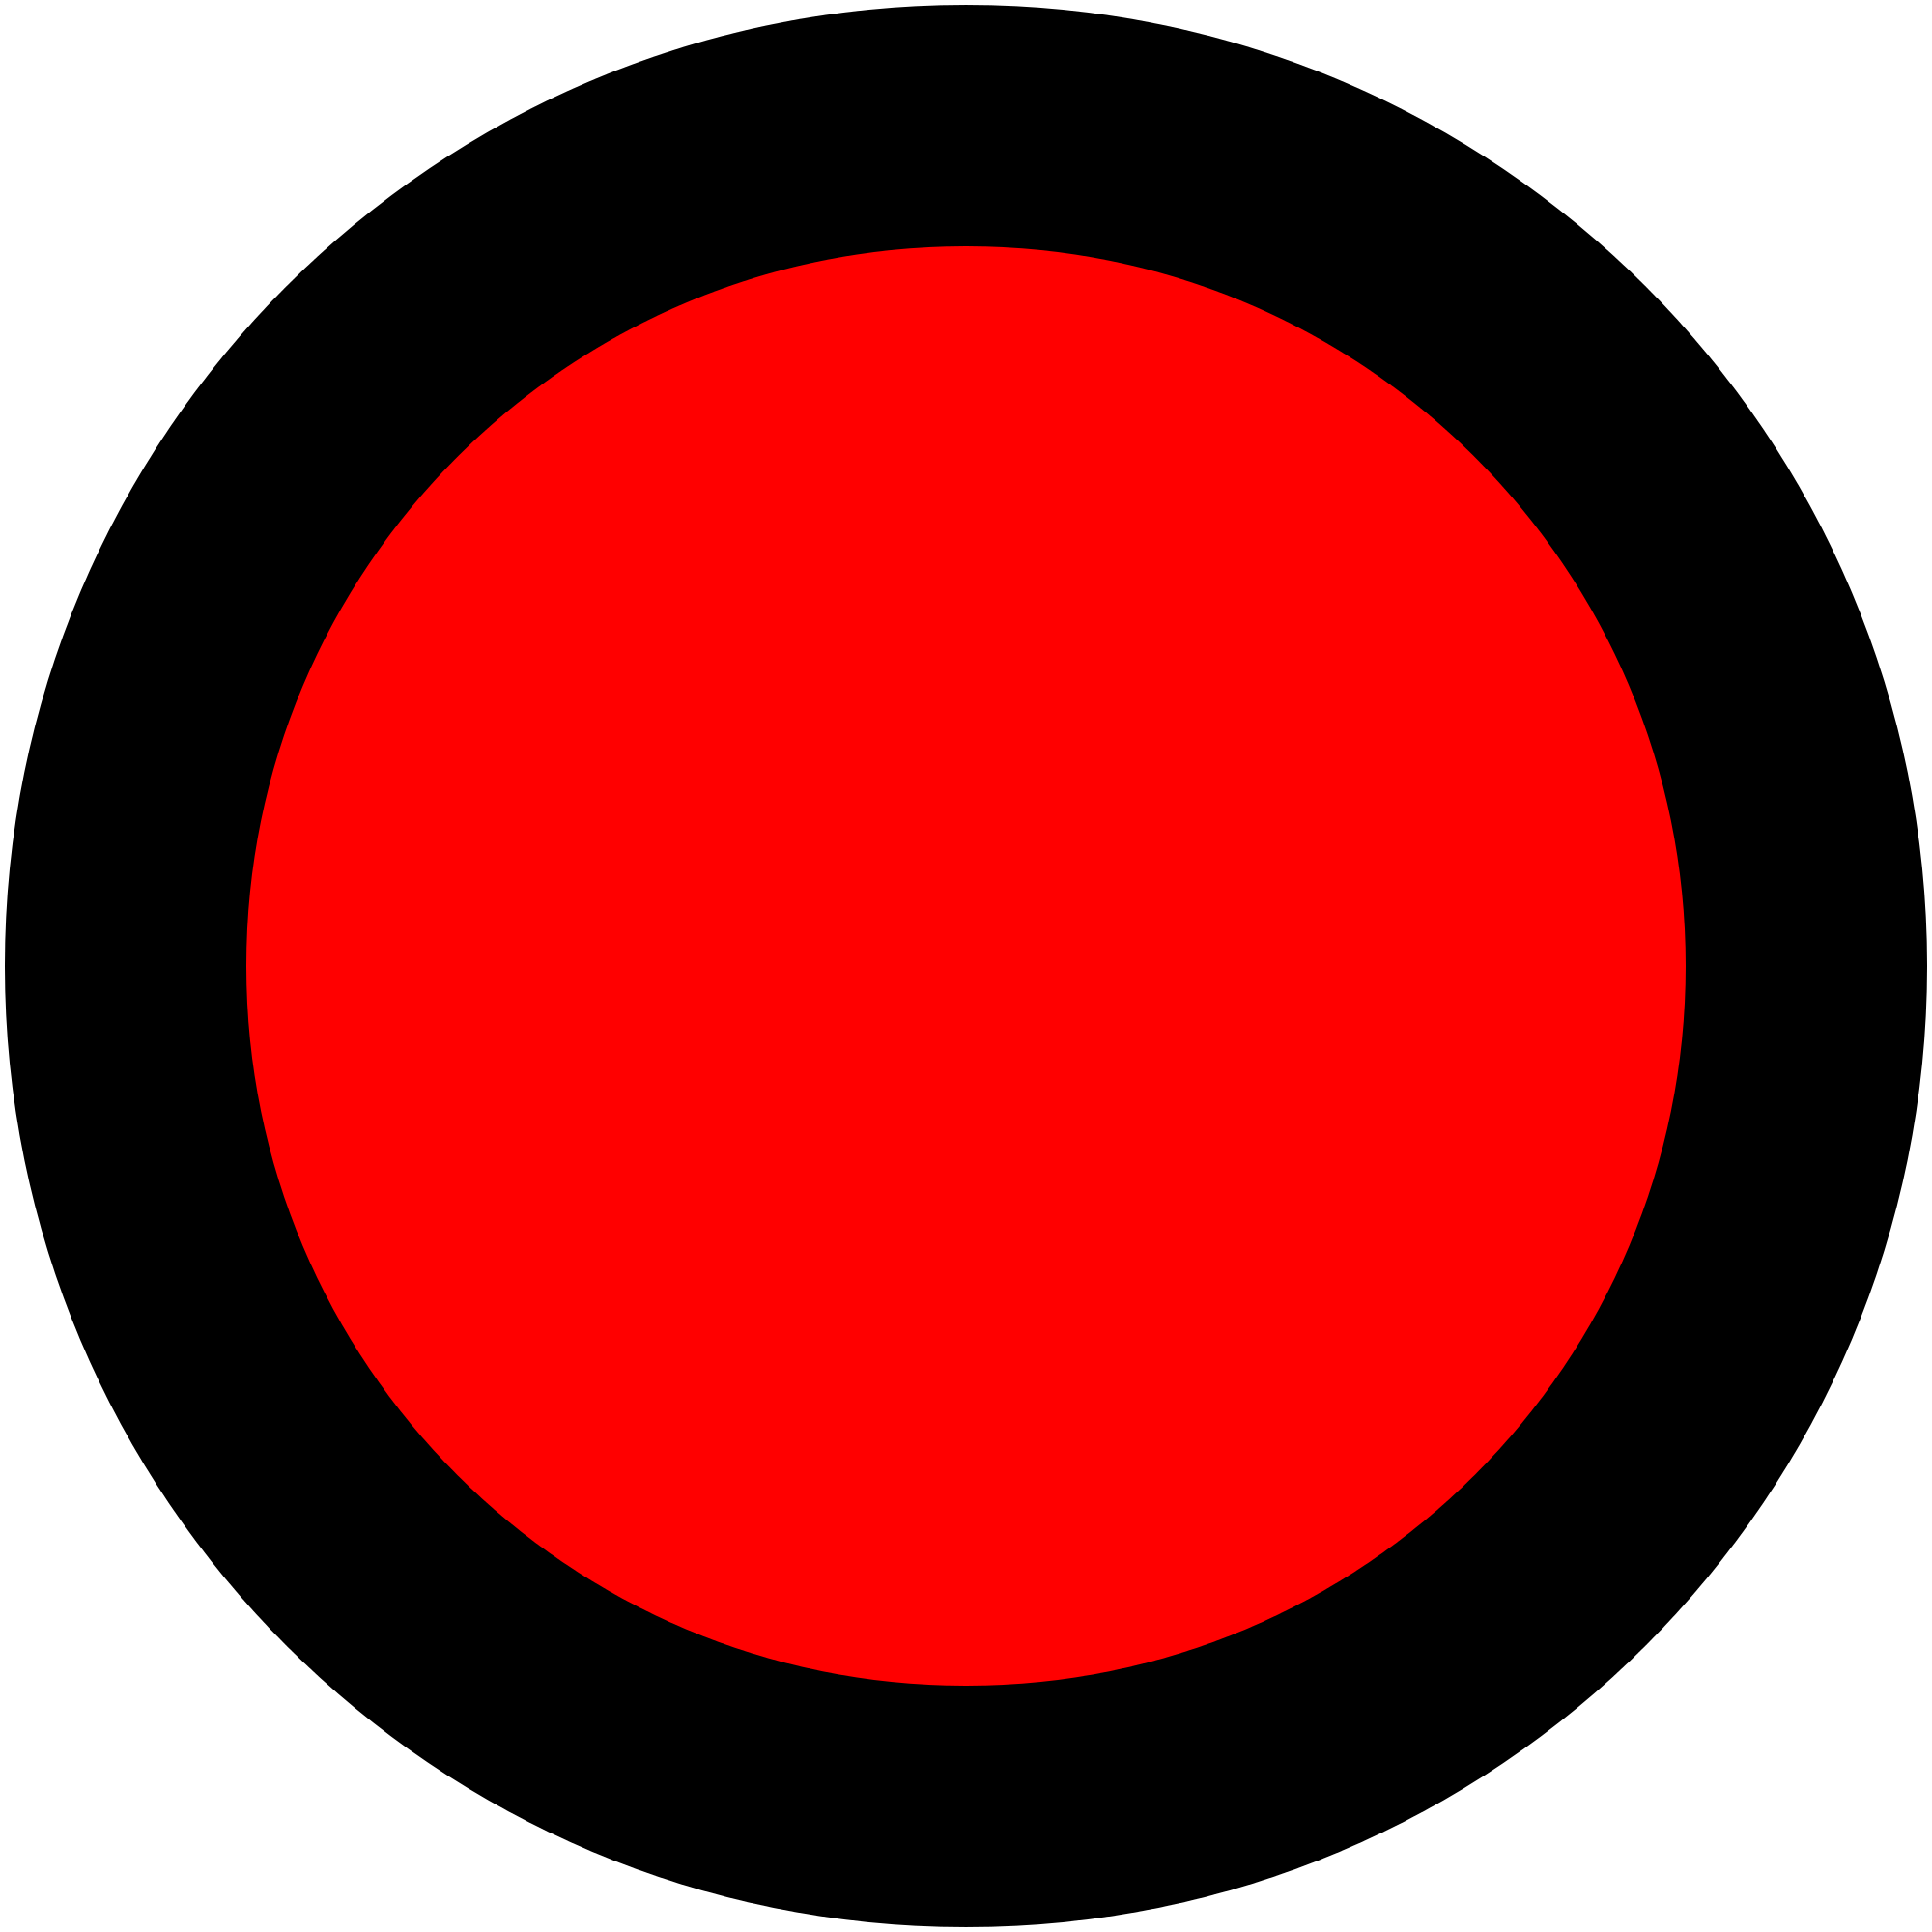 File:Big Red Button.png - Wikimedia Commons